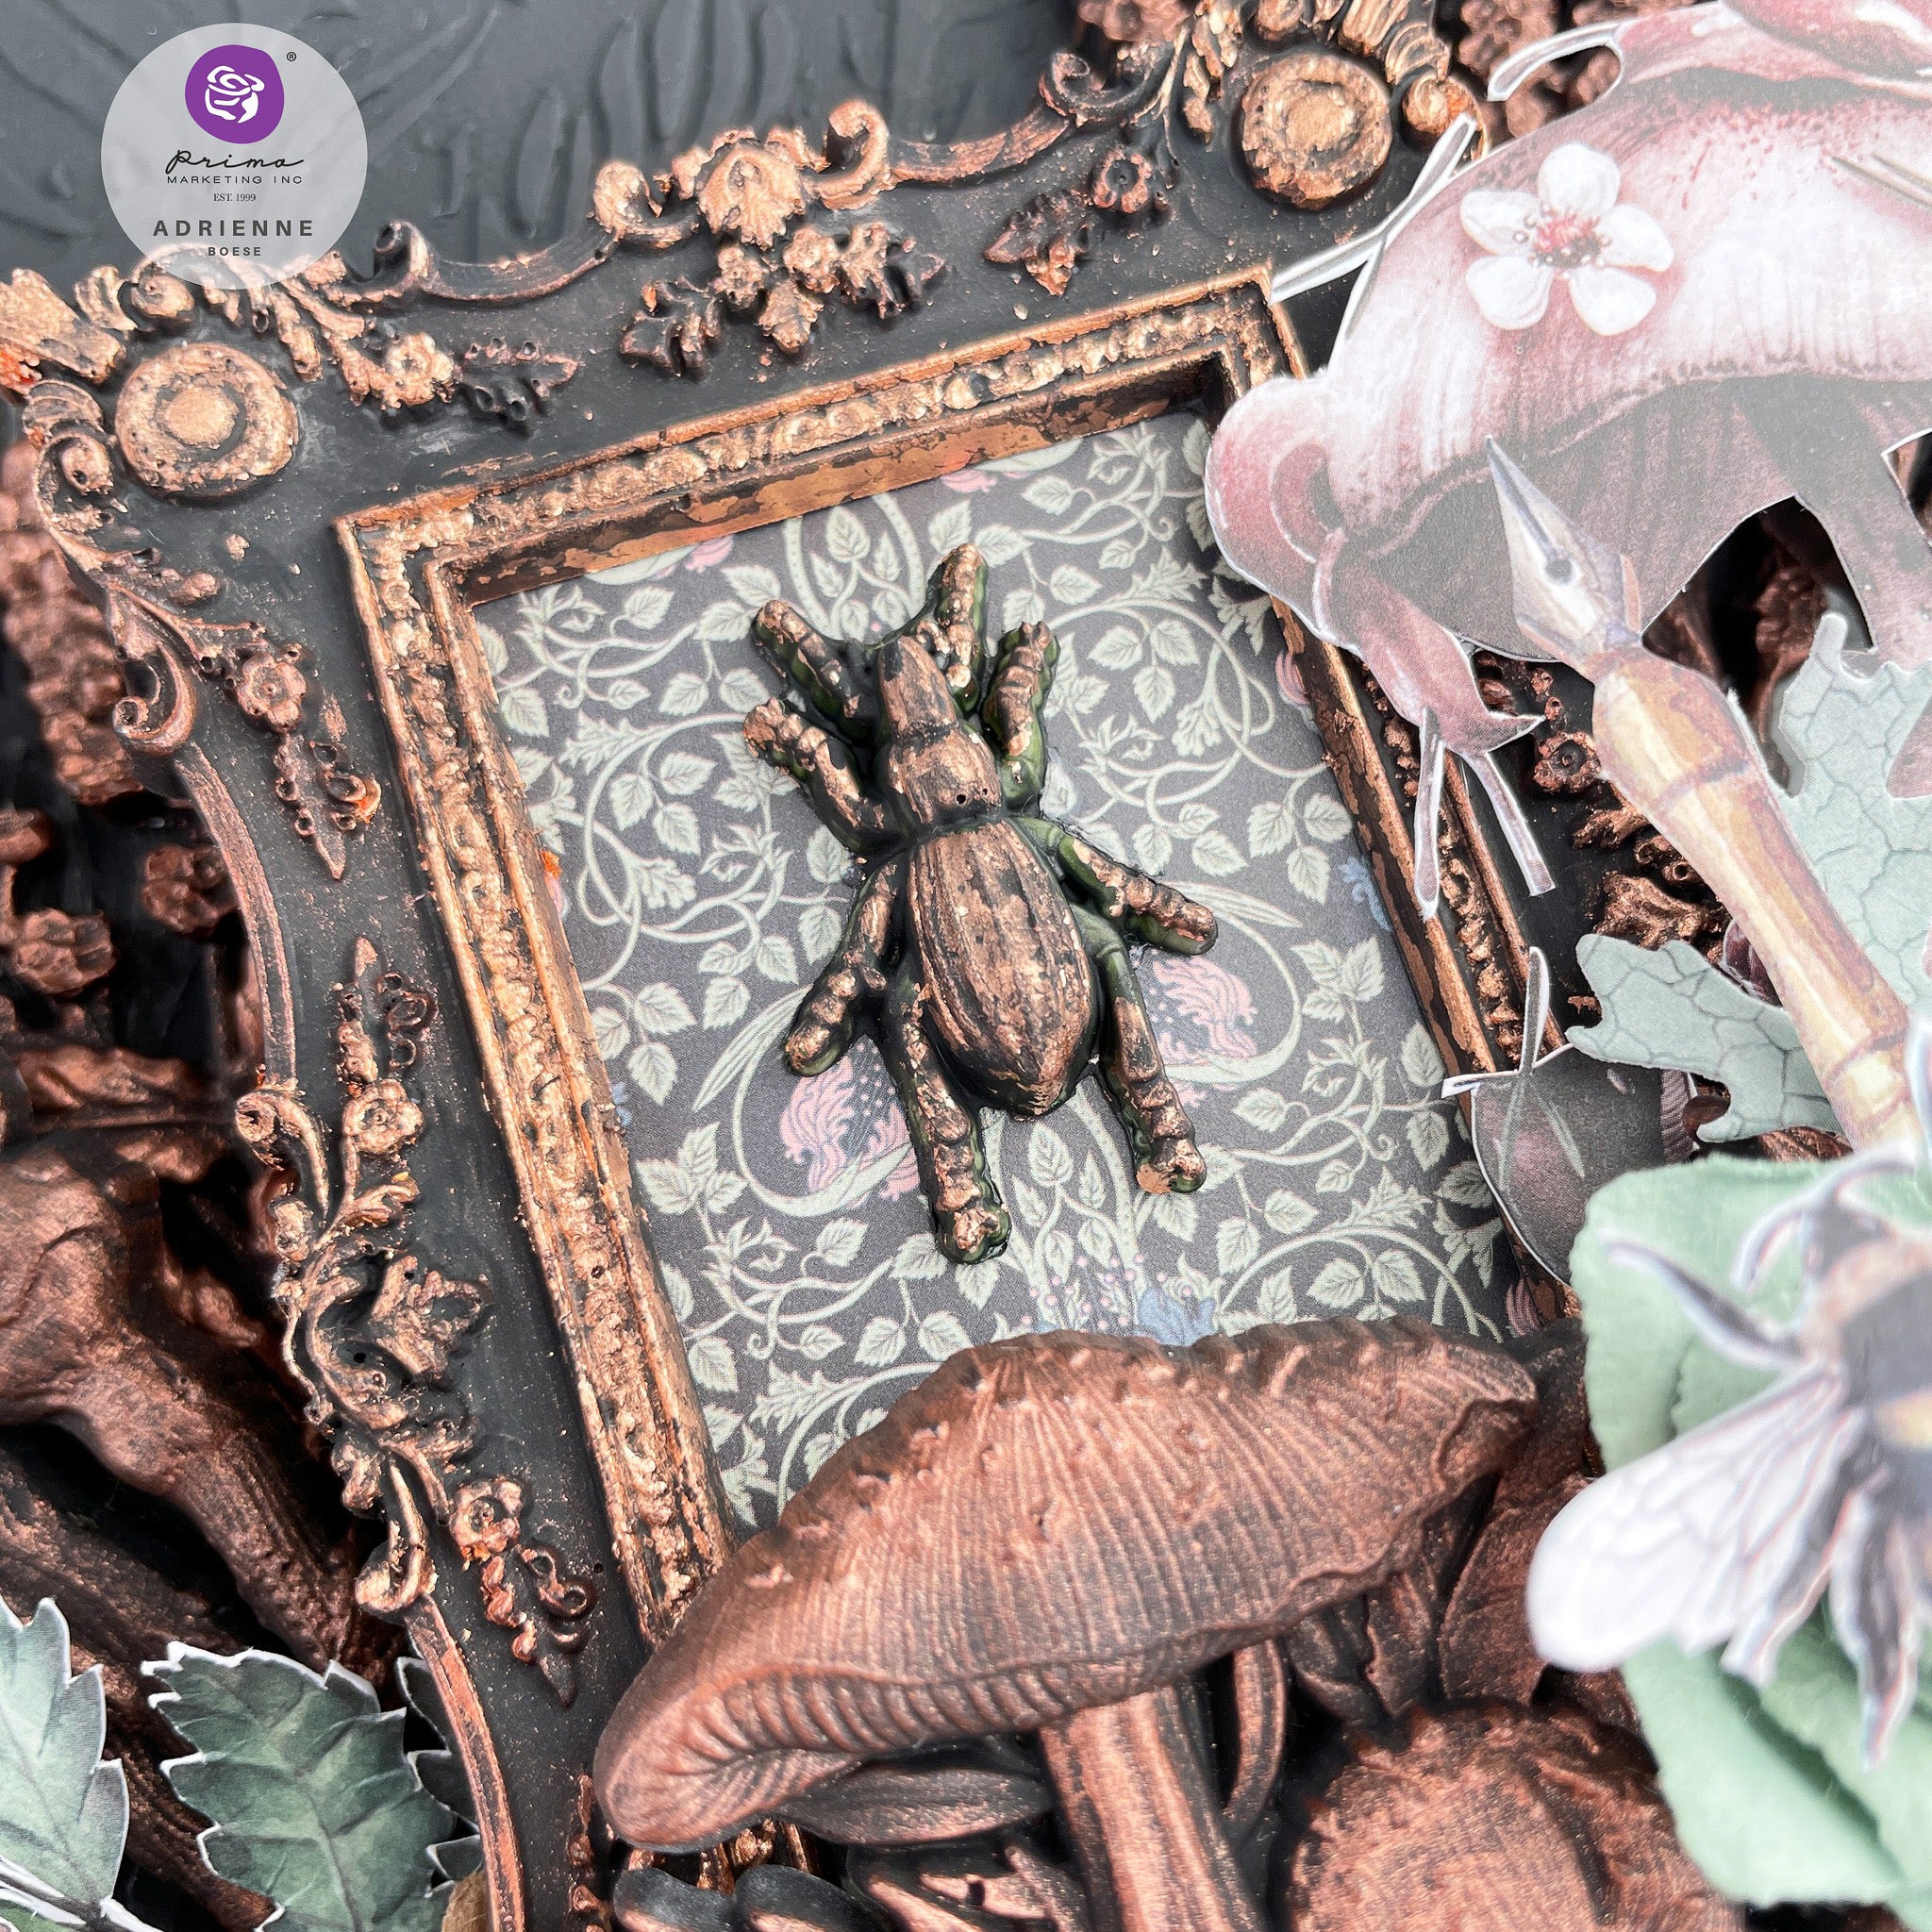 A bronze colored bug and cluster of mushrooms from Prima Marketing's Nature Academia silicone mold are featured on an antique picture frame.